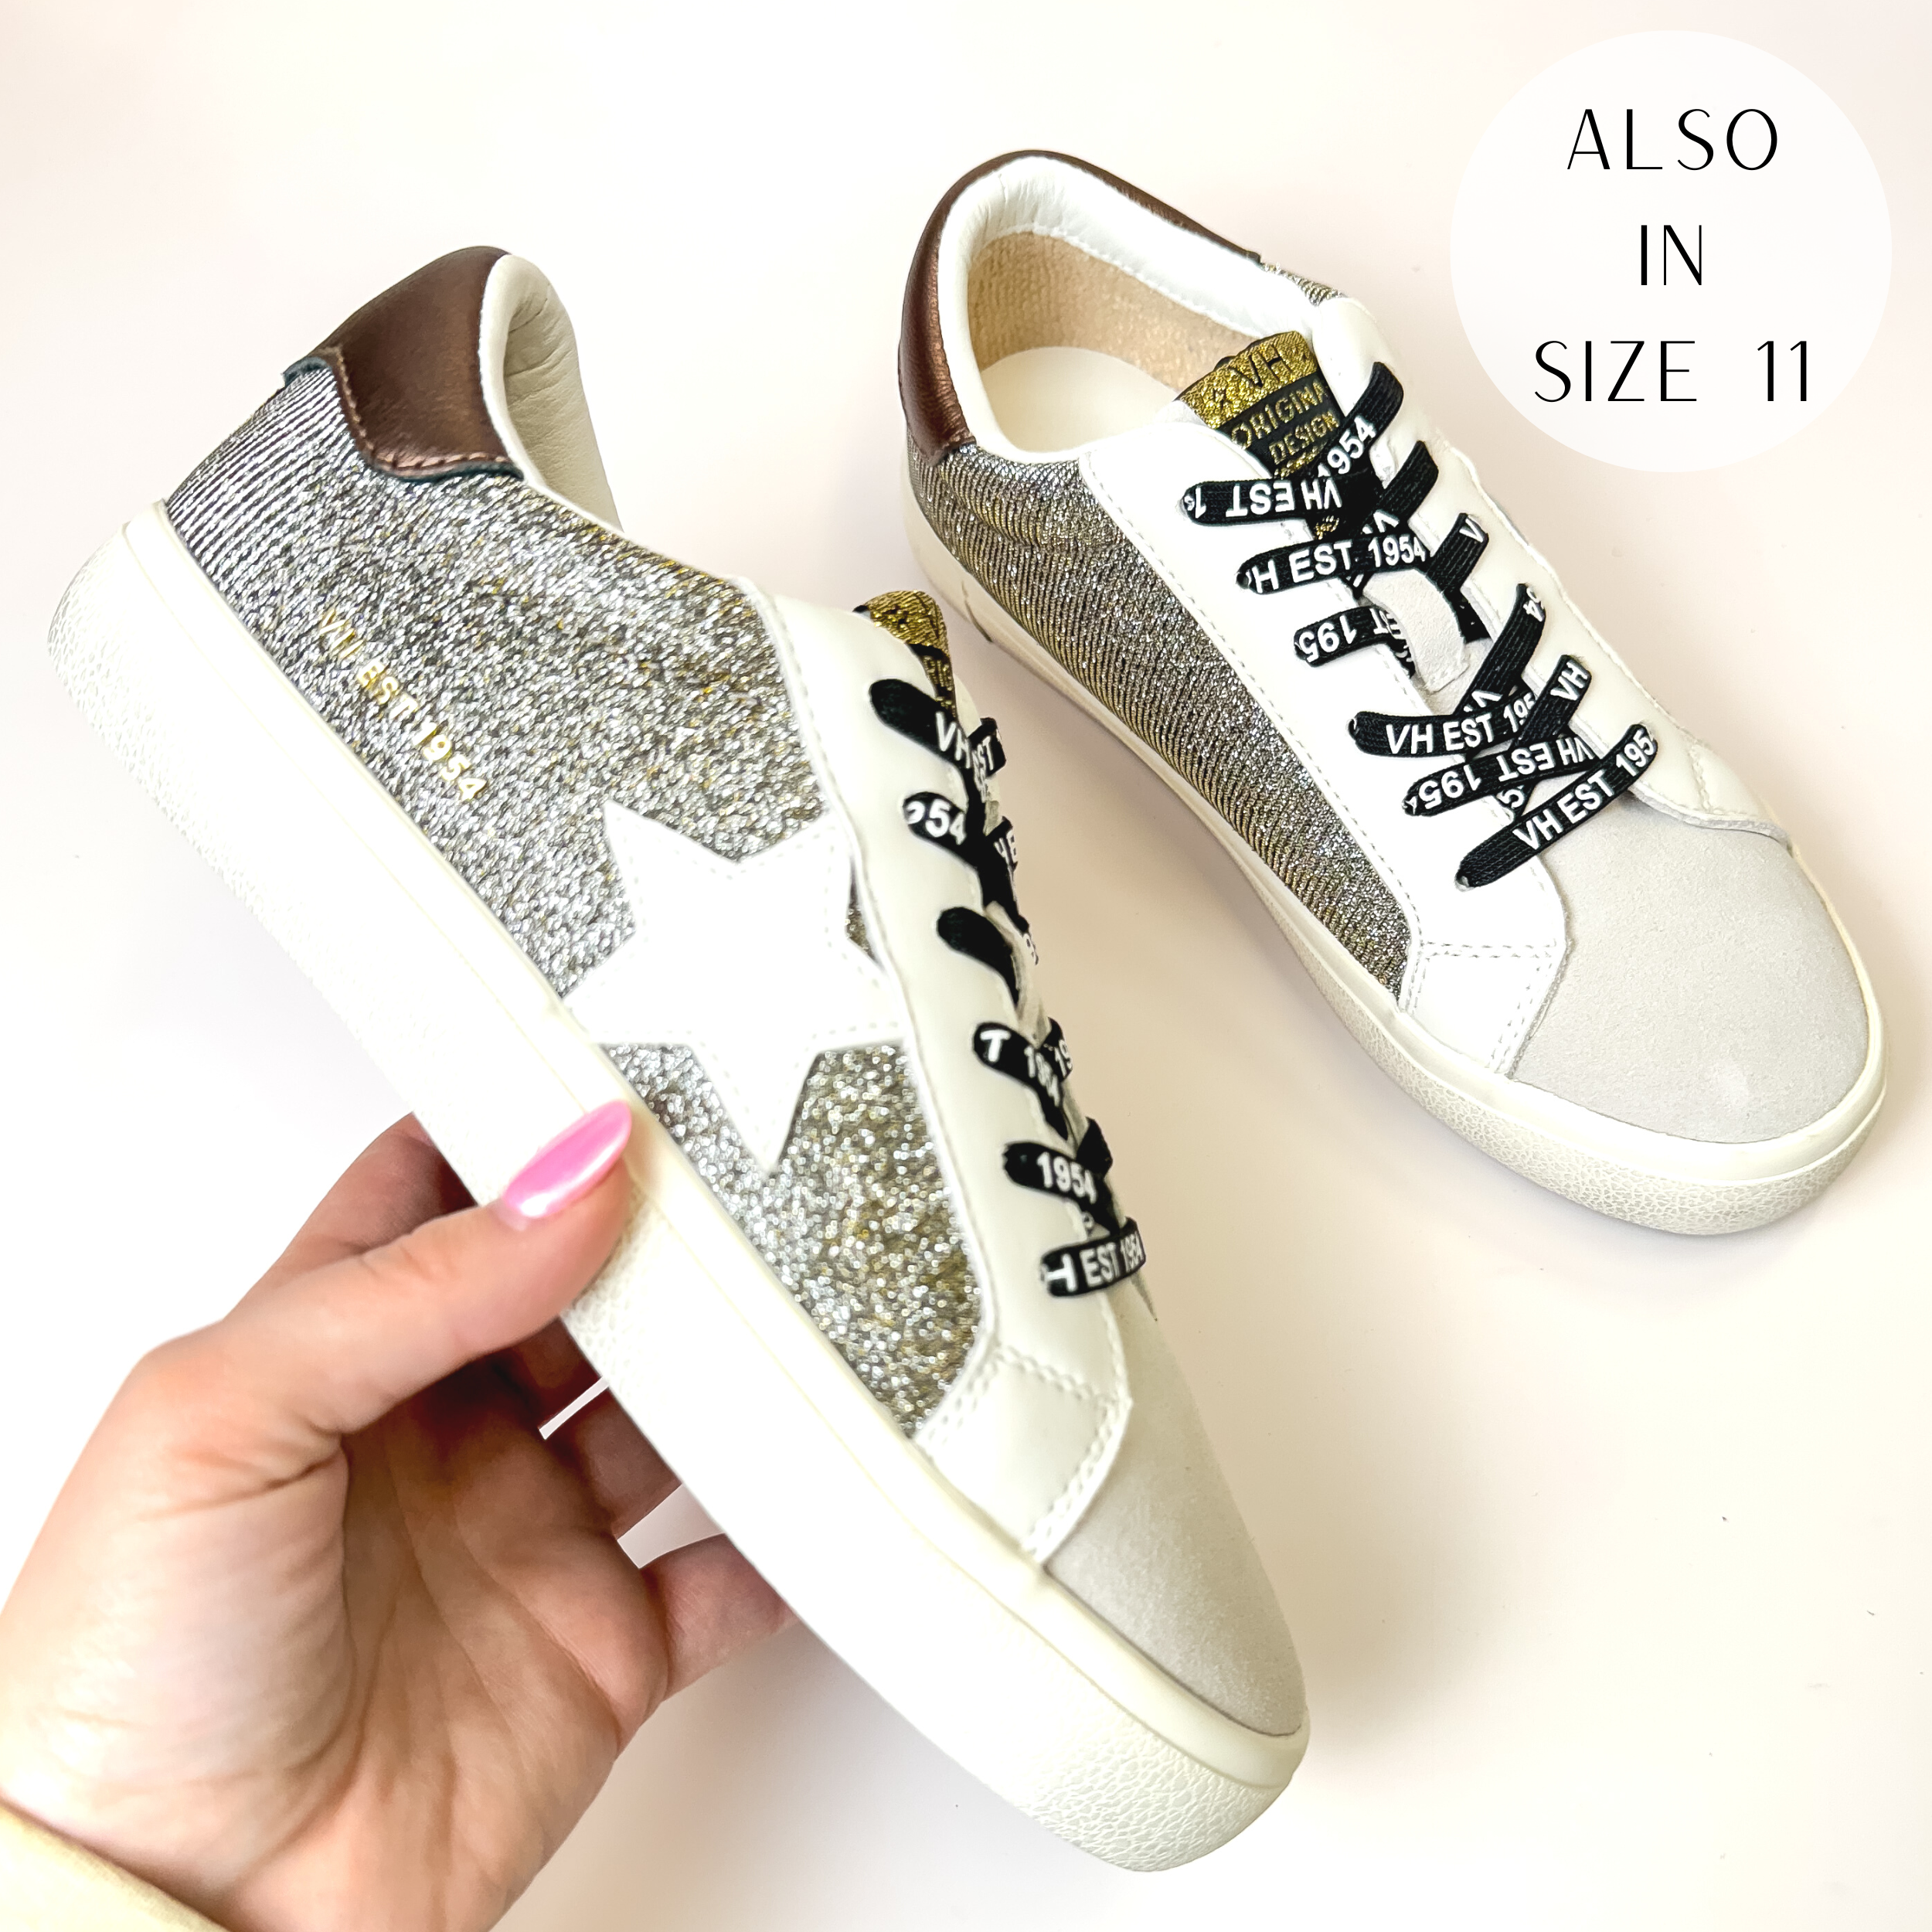 Vintage Havana | Flair 22 Sneakers in Black and Gold Metallic - Giddy Up Glamour Boutique